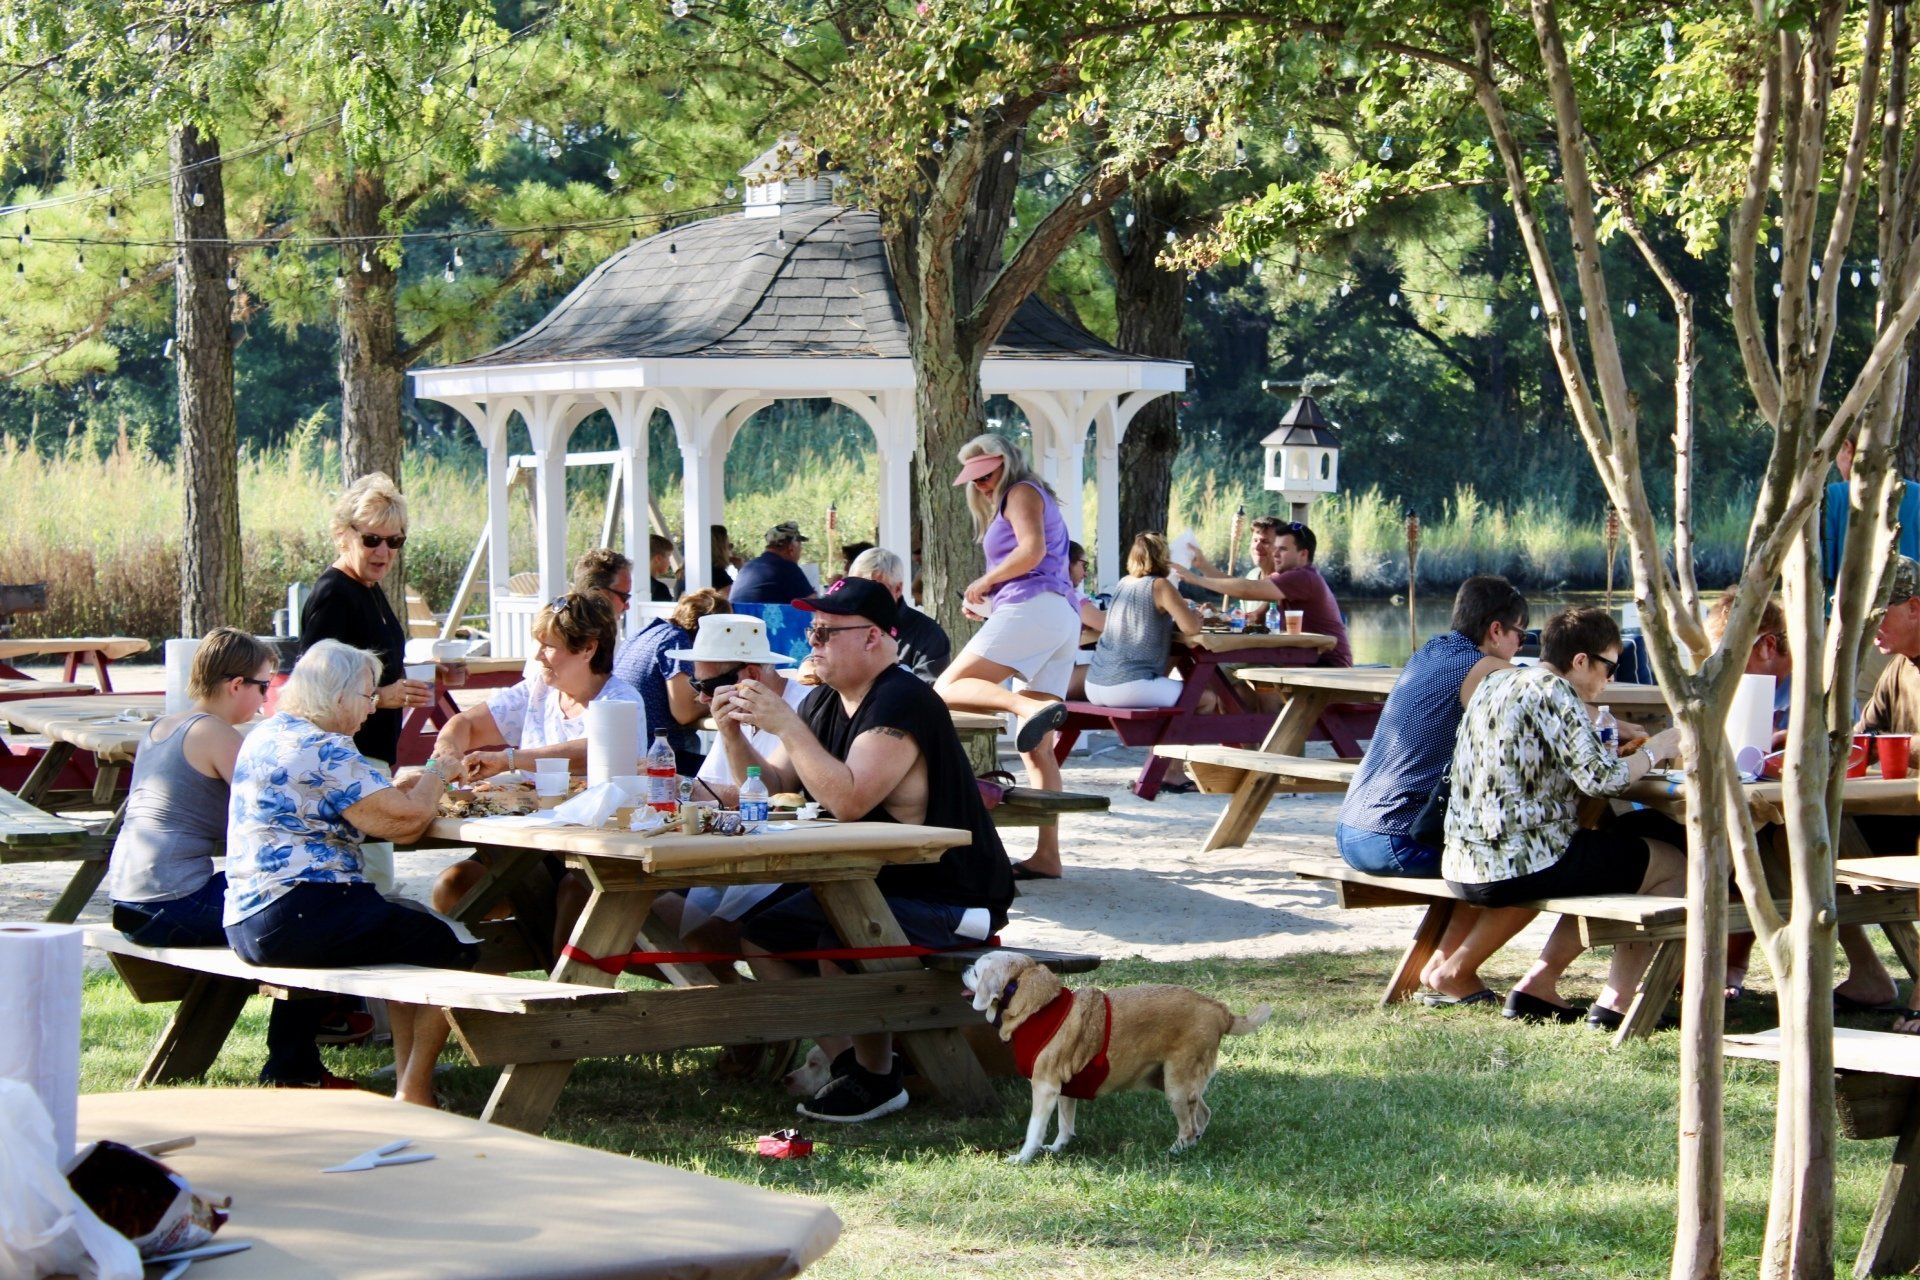 People eating in park with picnic tables and trees